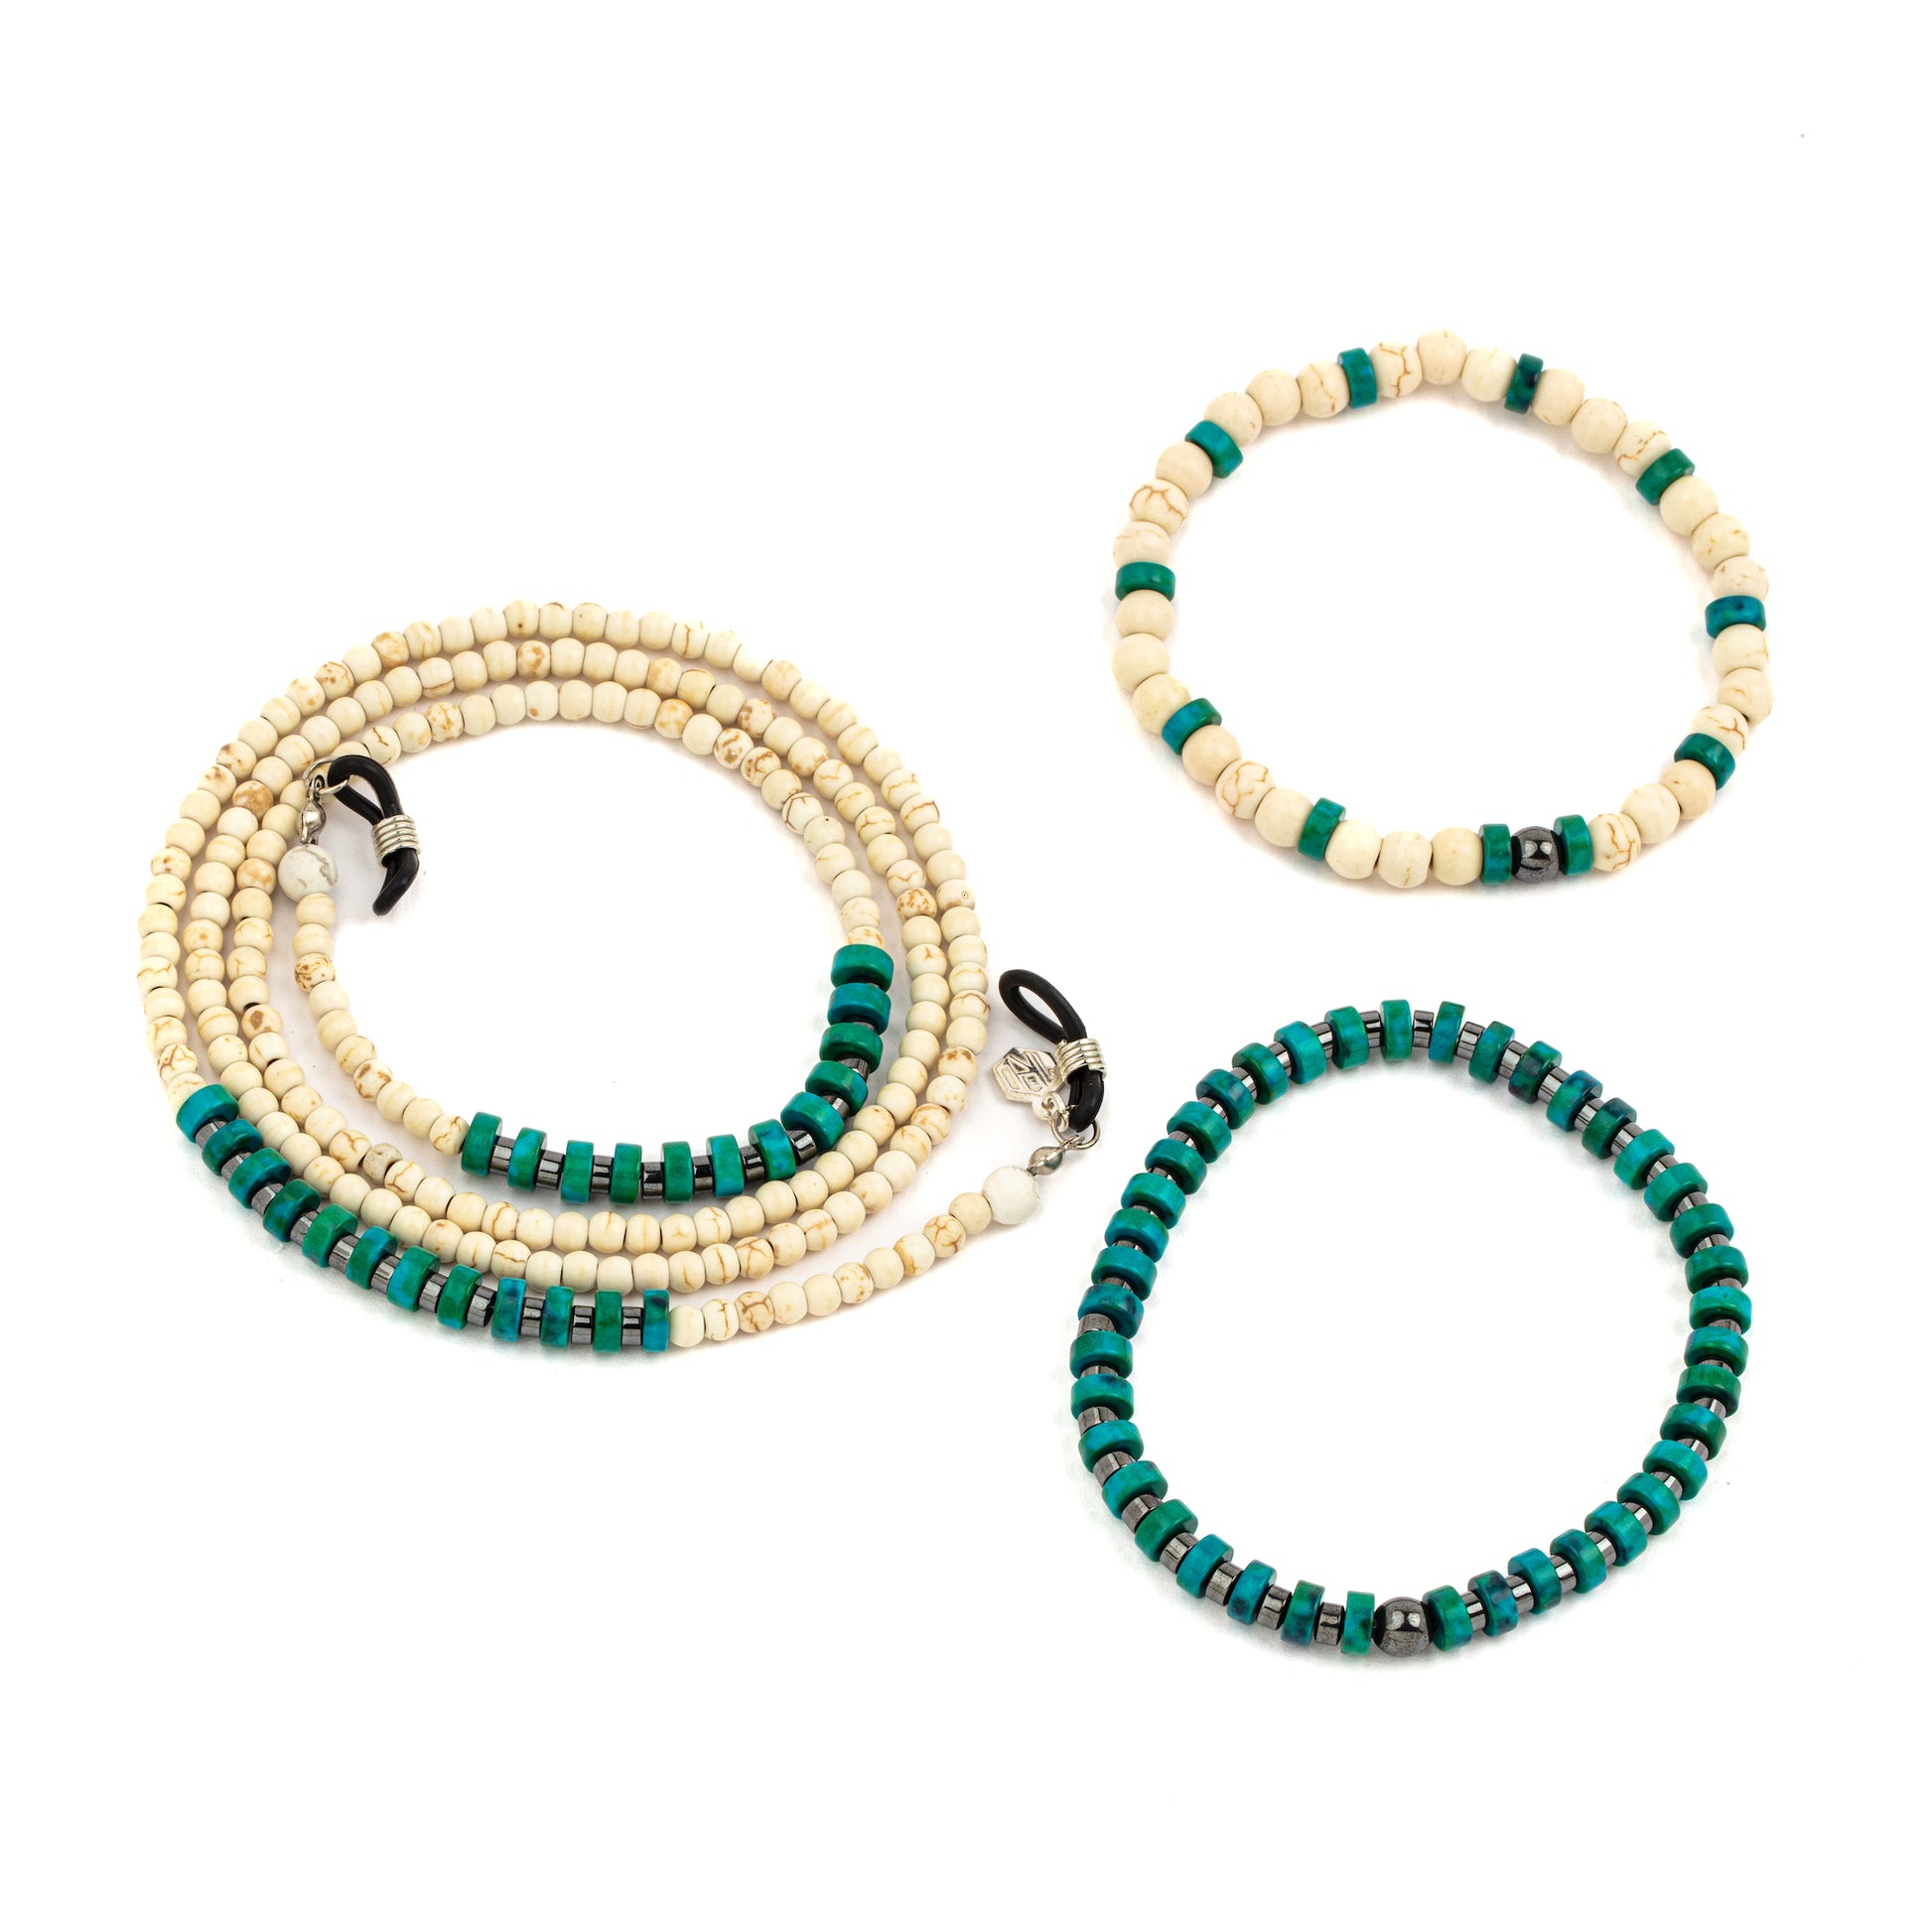 Howlite Turquoise Glasses Chain with Bracelets set